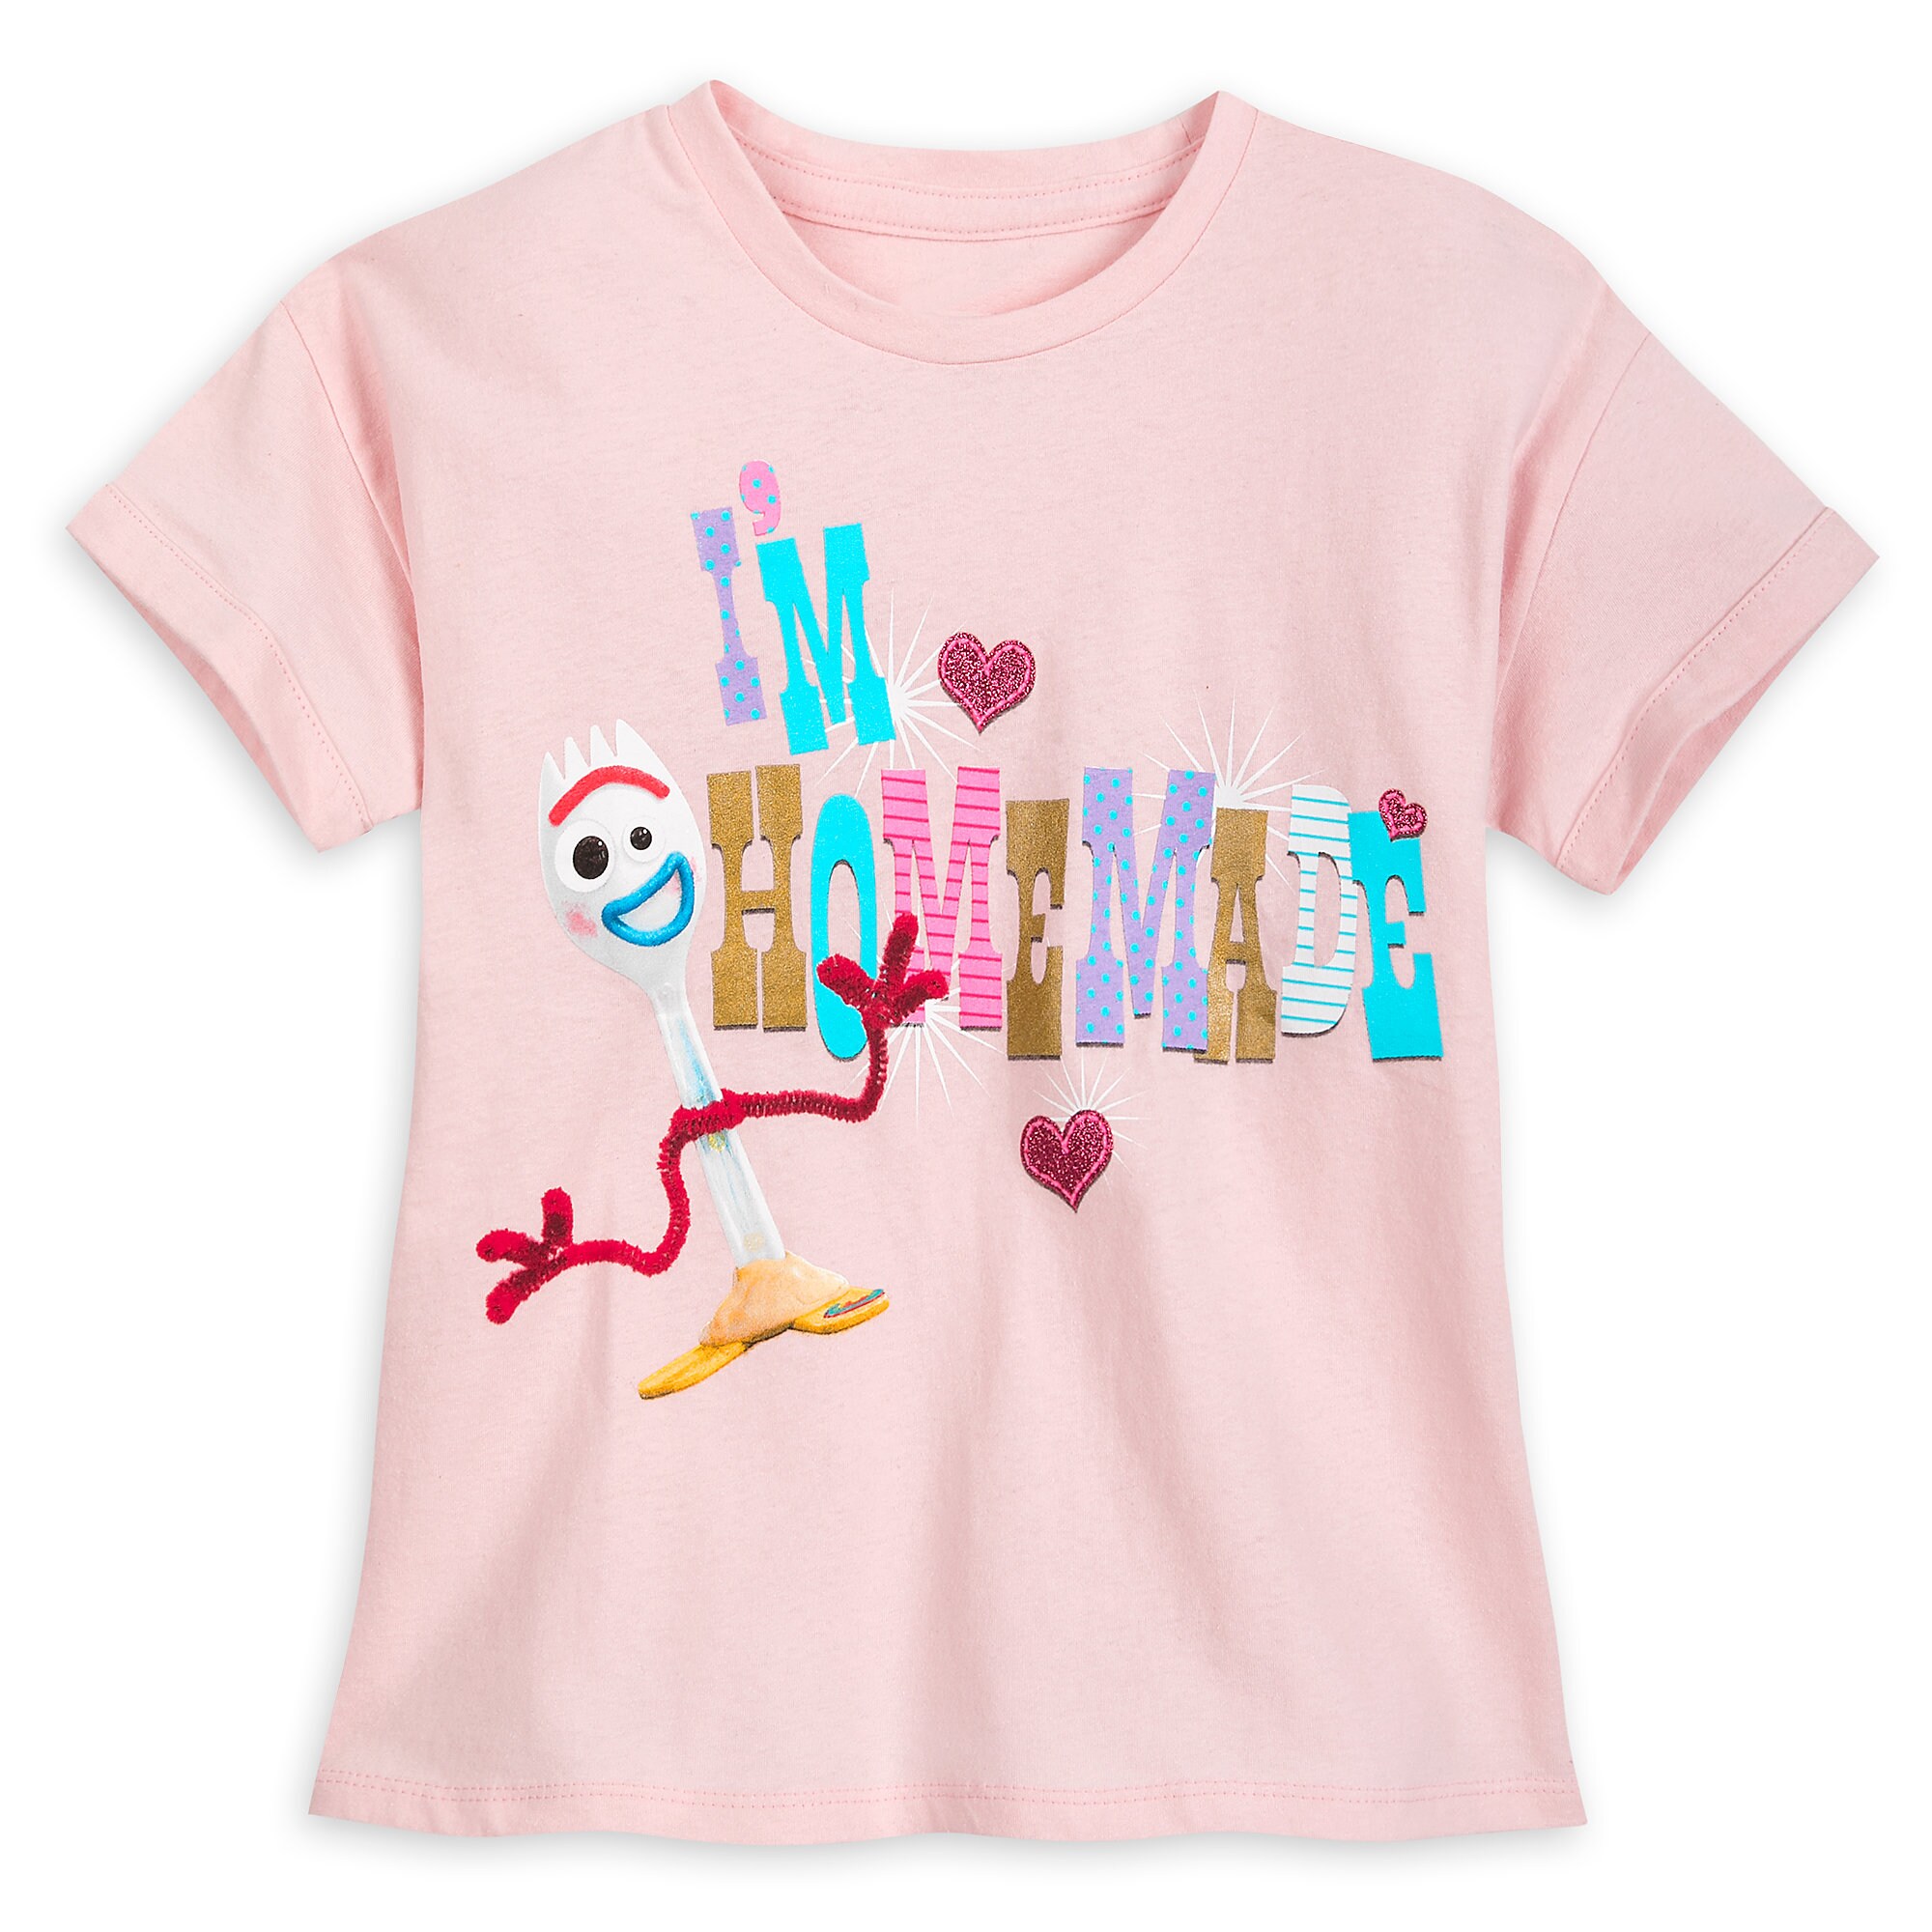 Forky T-Shirt for Girls - Toy Story 4